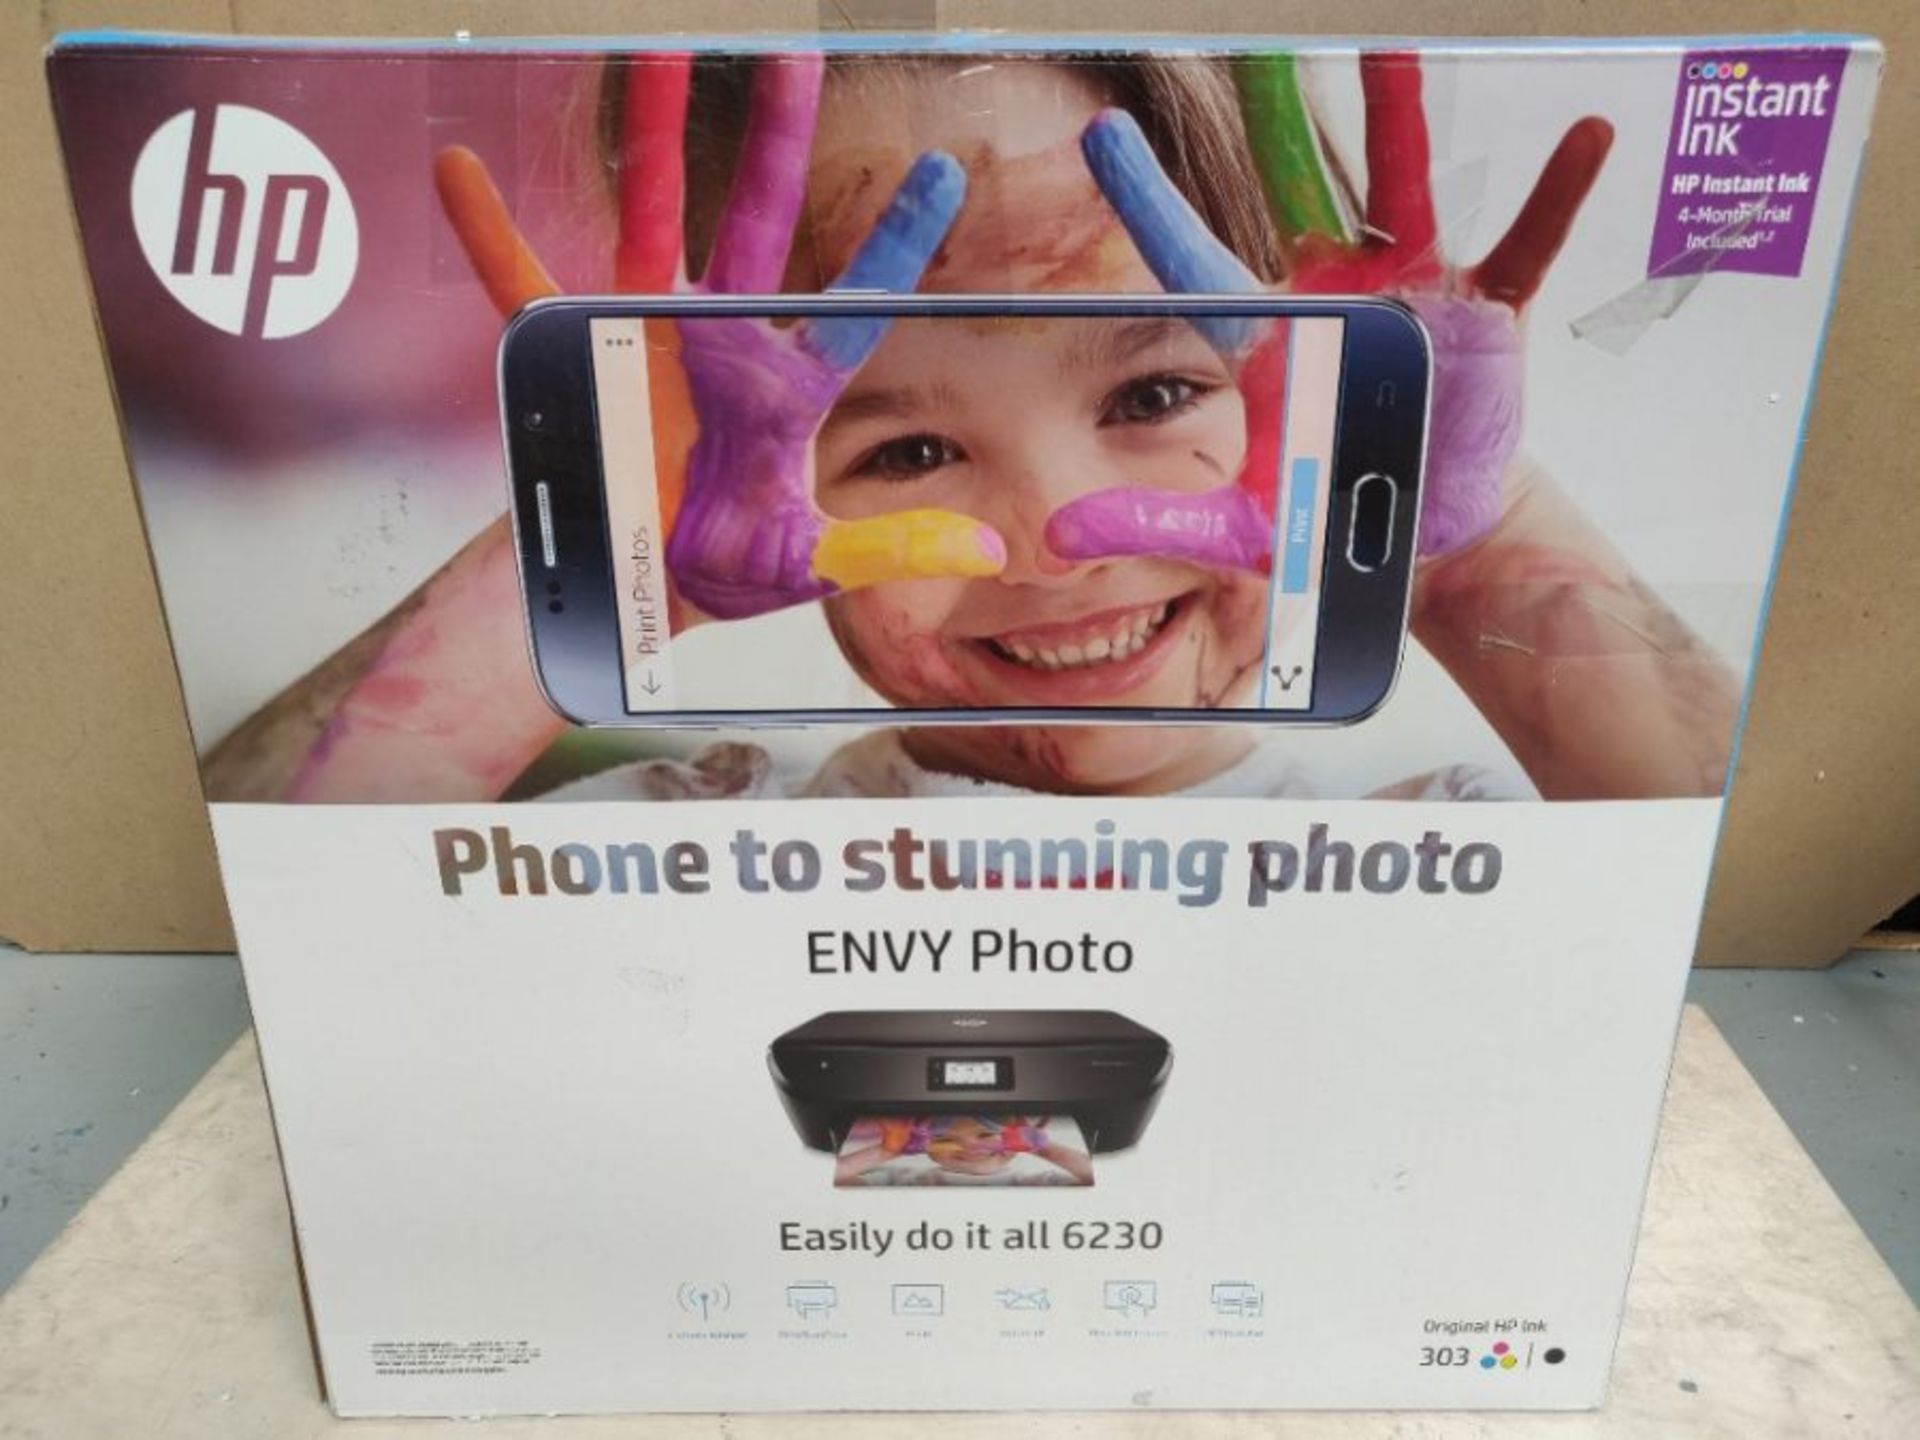 RRP £84.00 HP Envy Photo 6230 All-in-One Wi-Fi Photo Printer with 4 Months of Instant Ink Include - Image 2 of 3